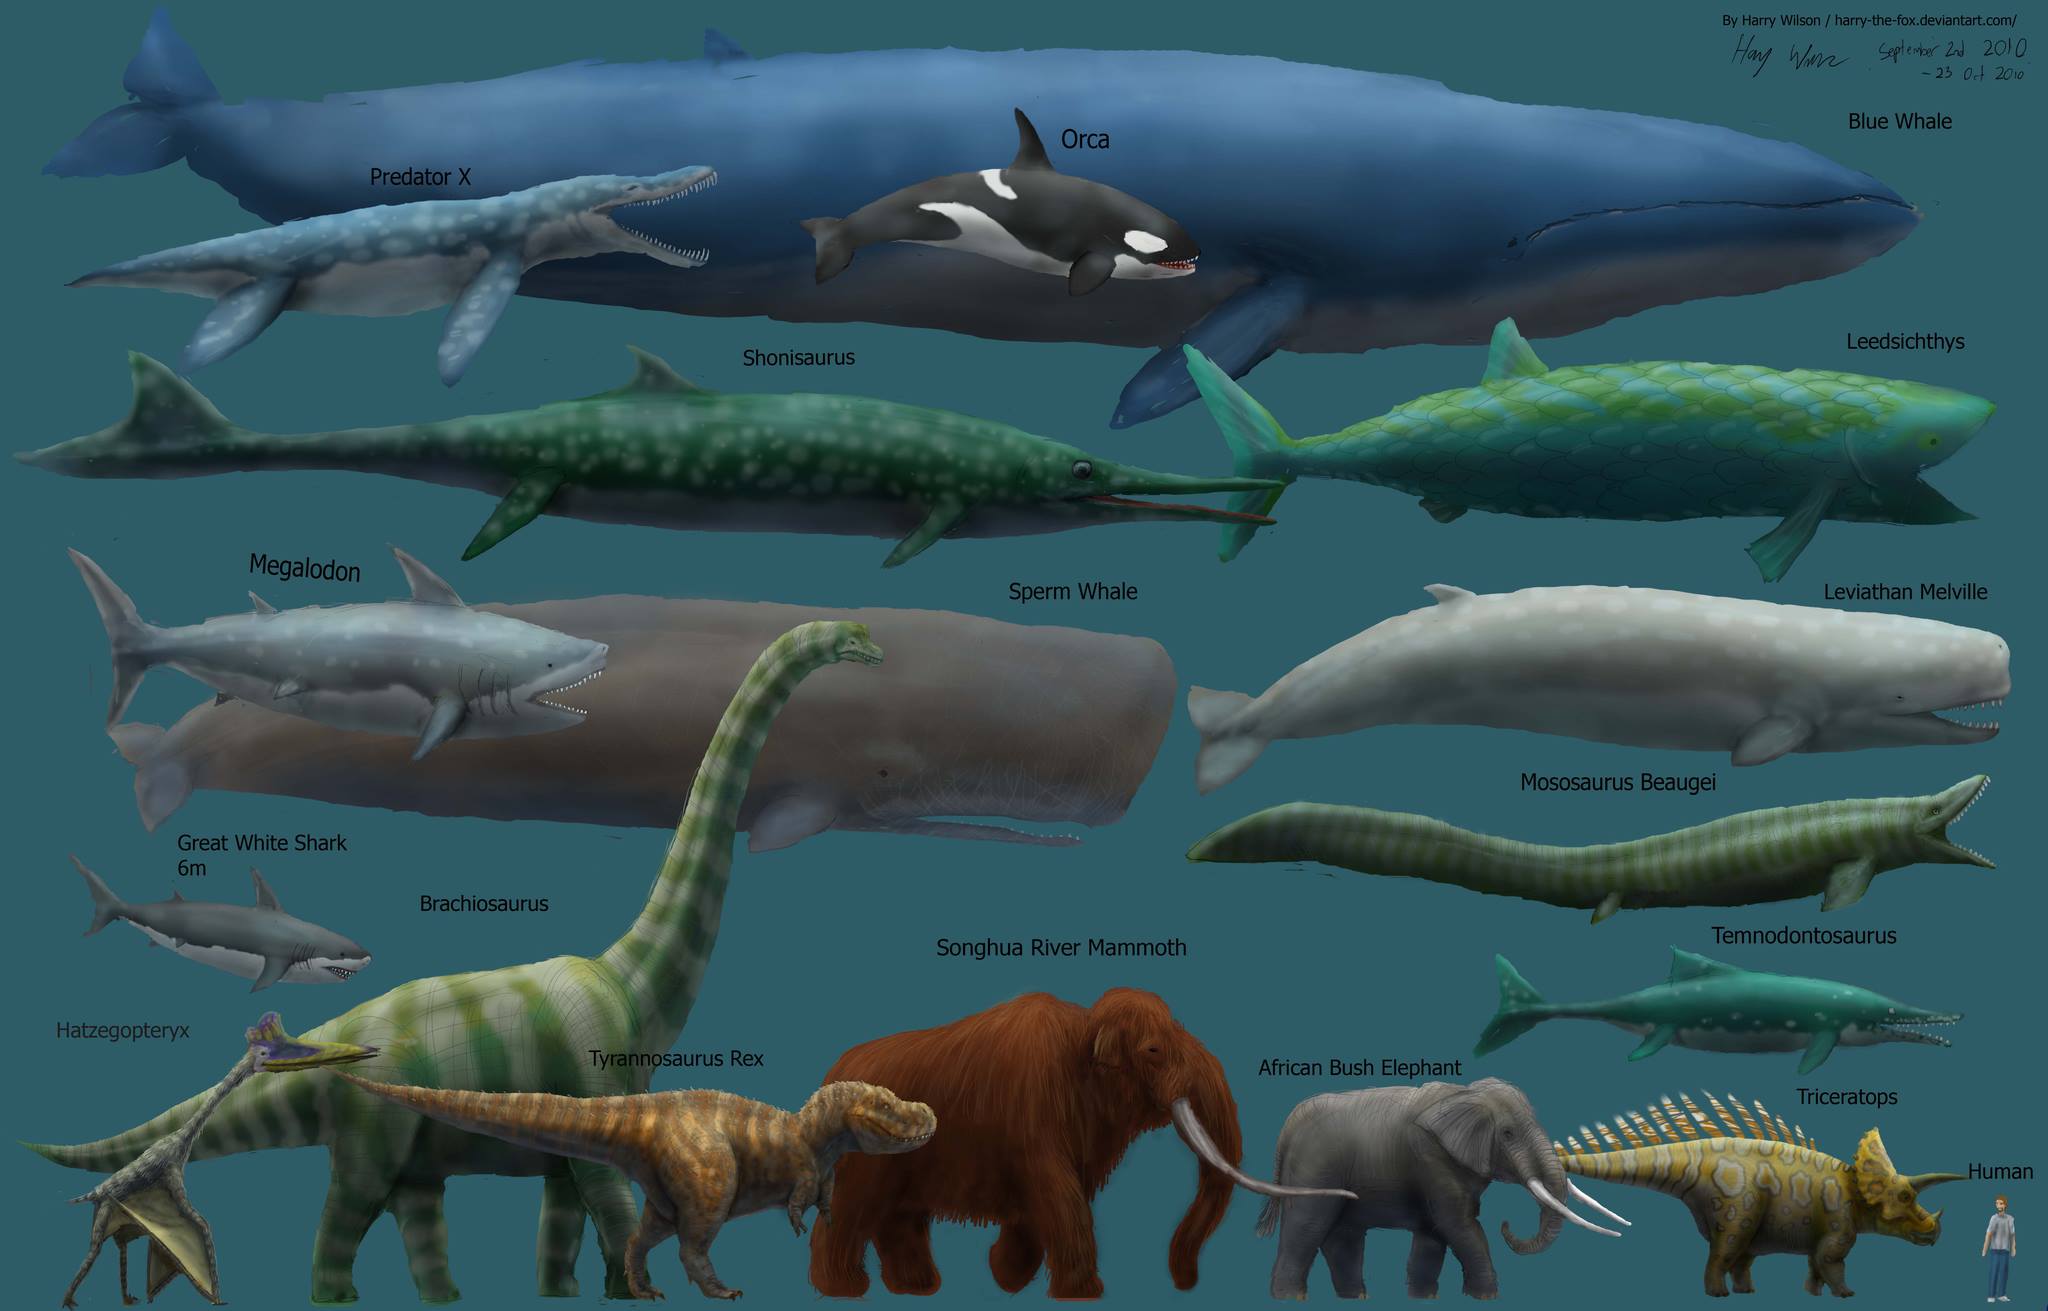 The blue whale is not only the largest animal alive currently, but is likely the largest animal ever to have lived.